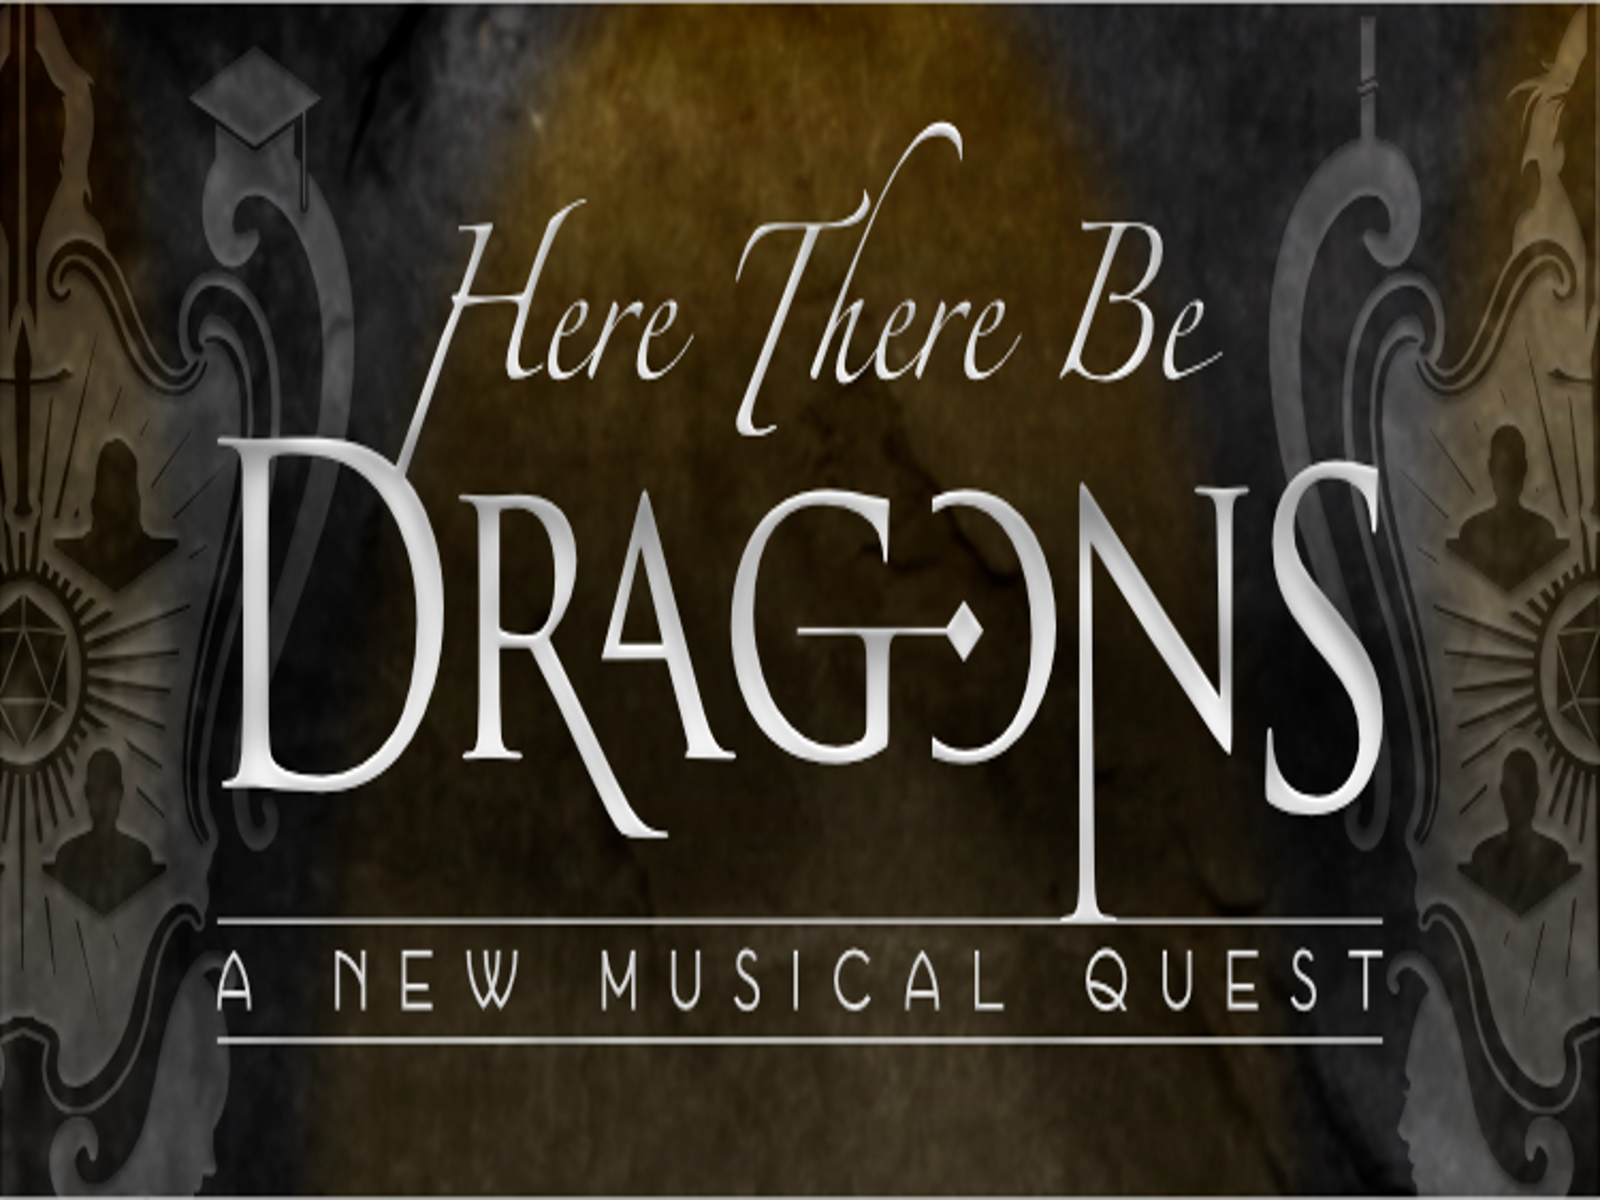 Here there be Dragons added a new - Here there be Dragons